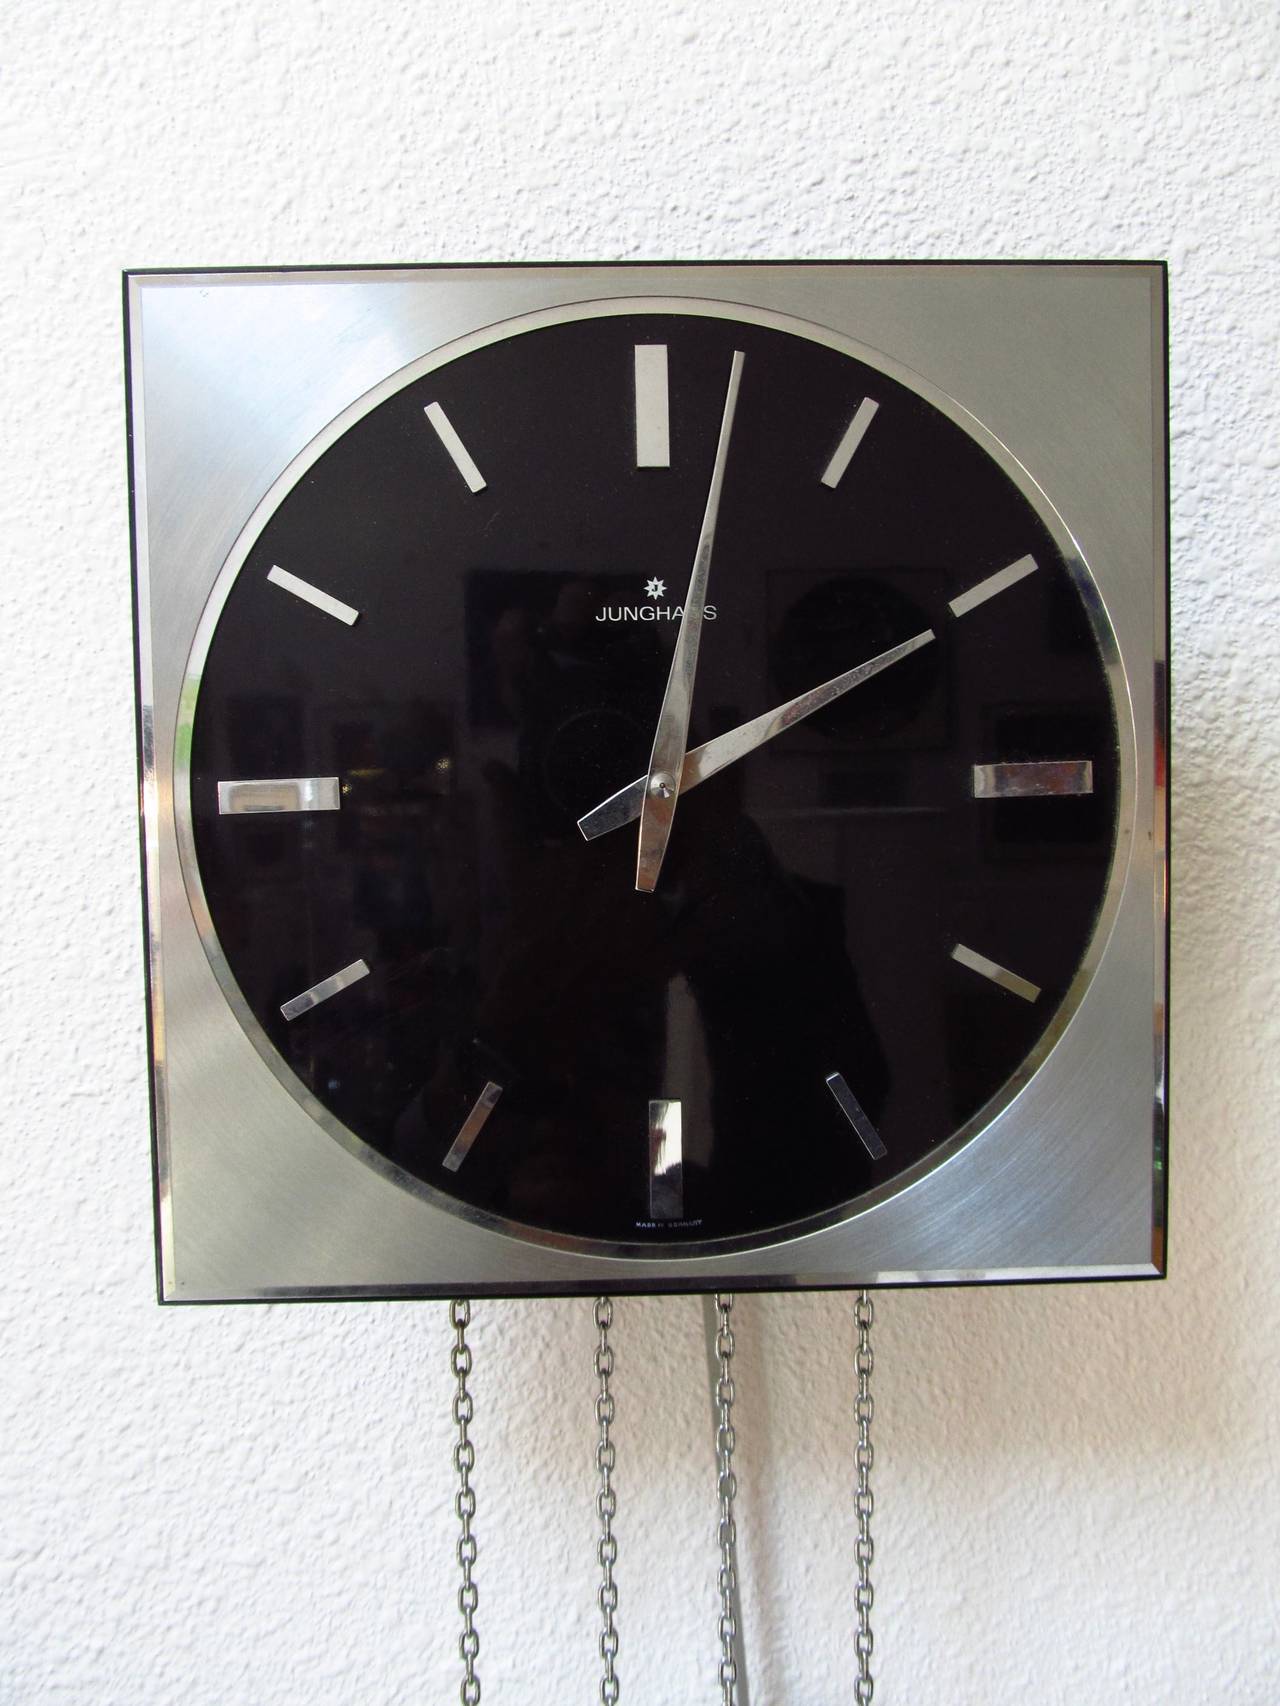 A very smart and Minimalist modern take on the traditional pendulum wall clock from Germany. It has chimes for the hour and half hour, that can be easily turned on or off with a small lever on the side of the case. Each chime has two notes, and they